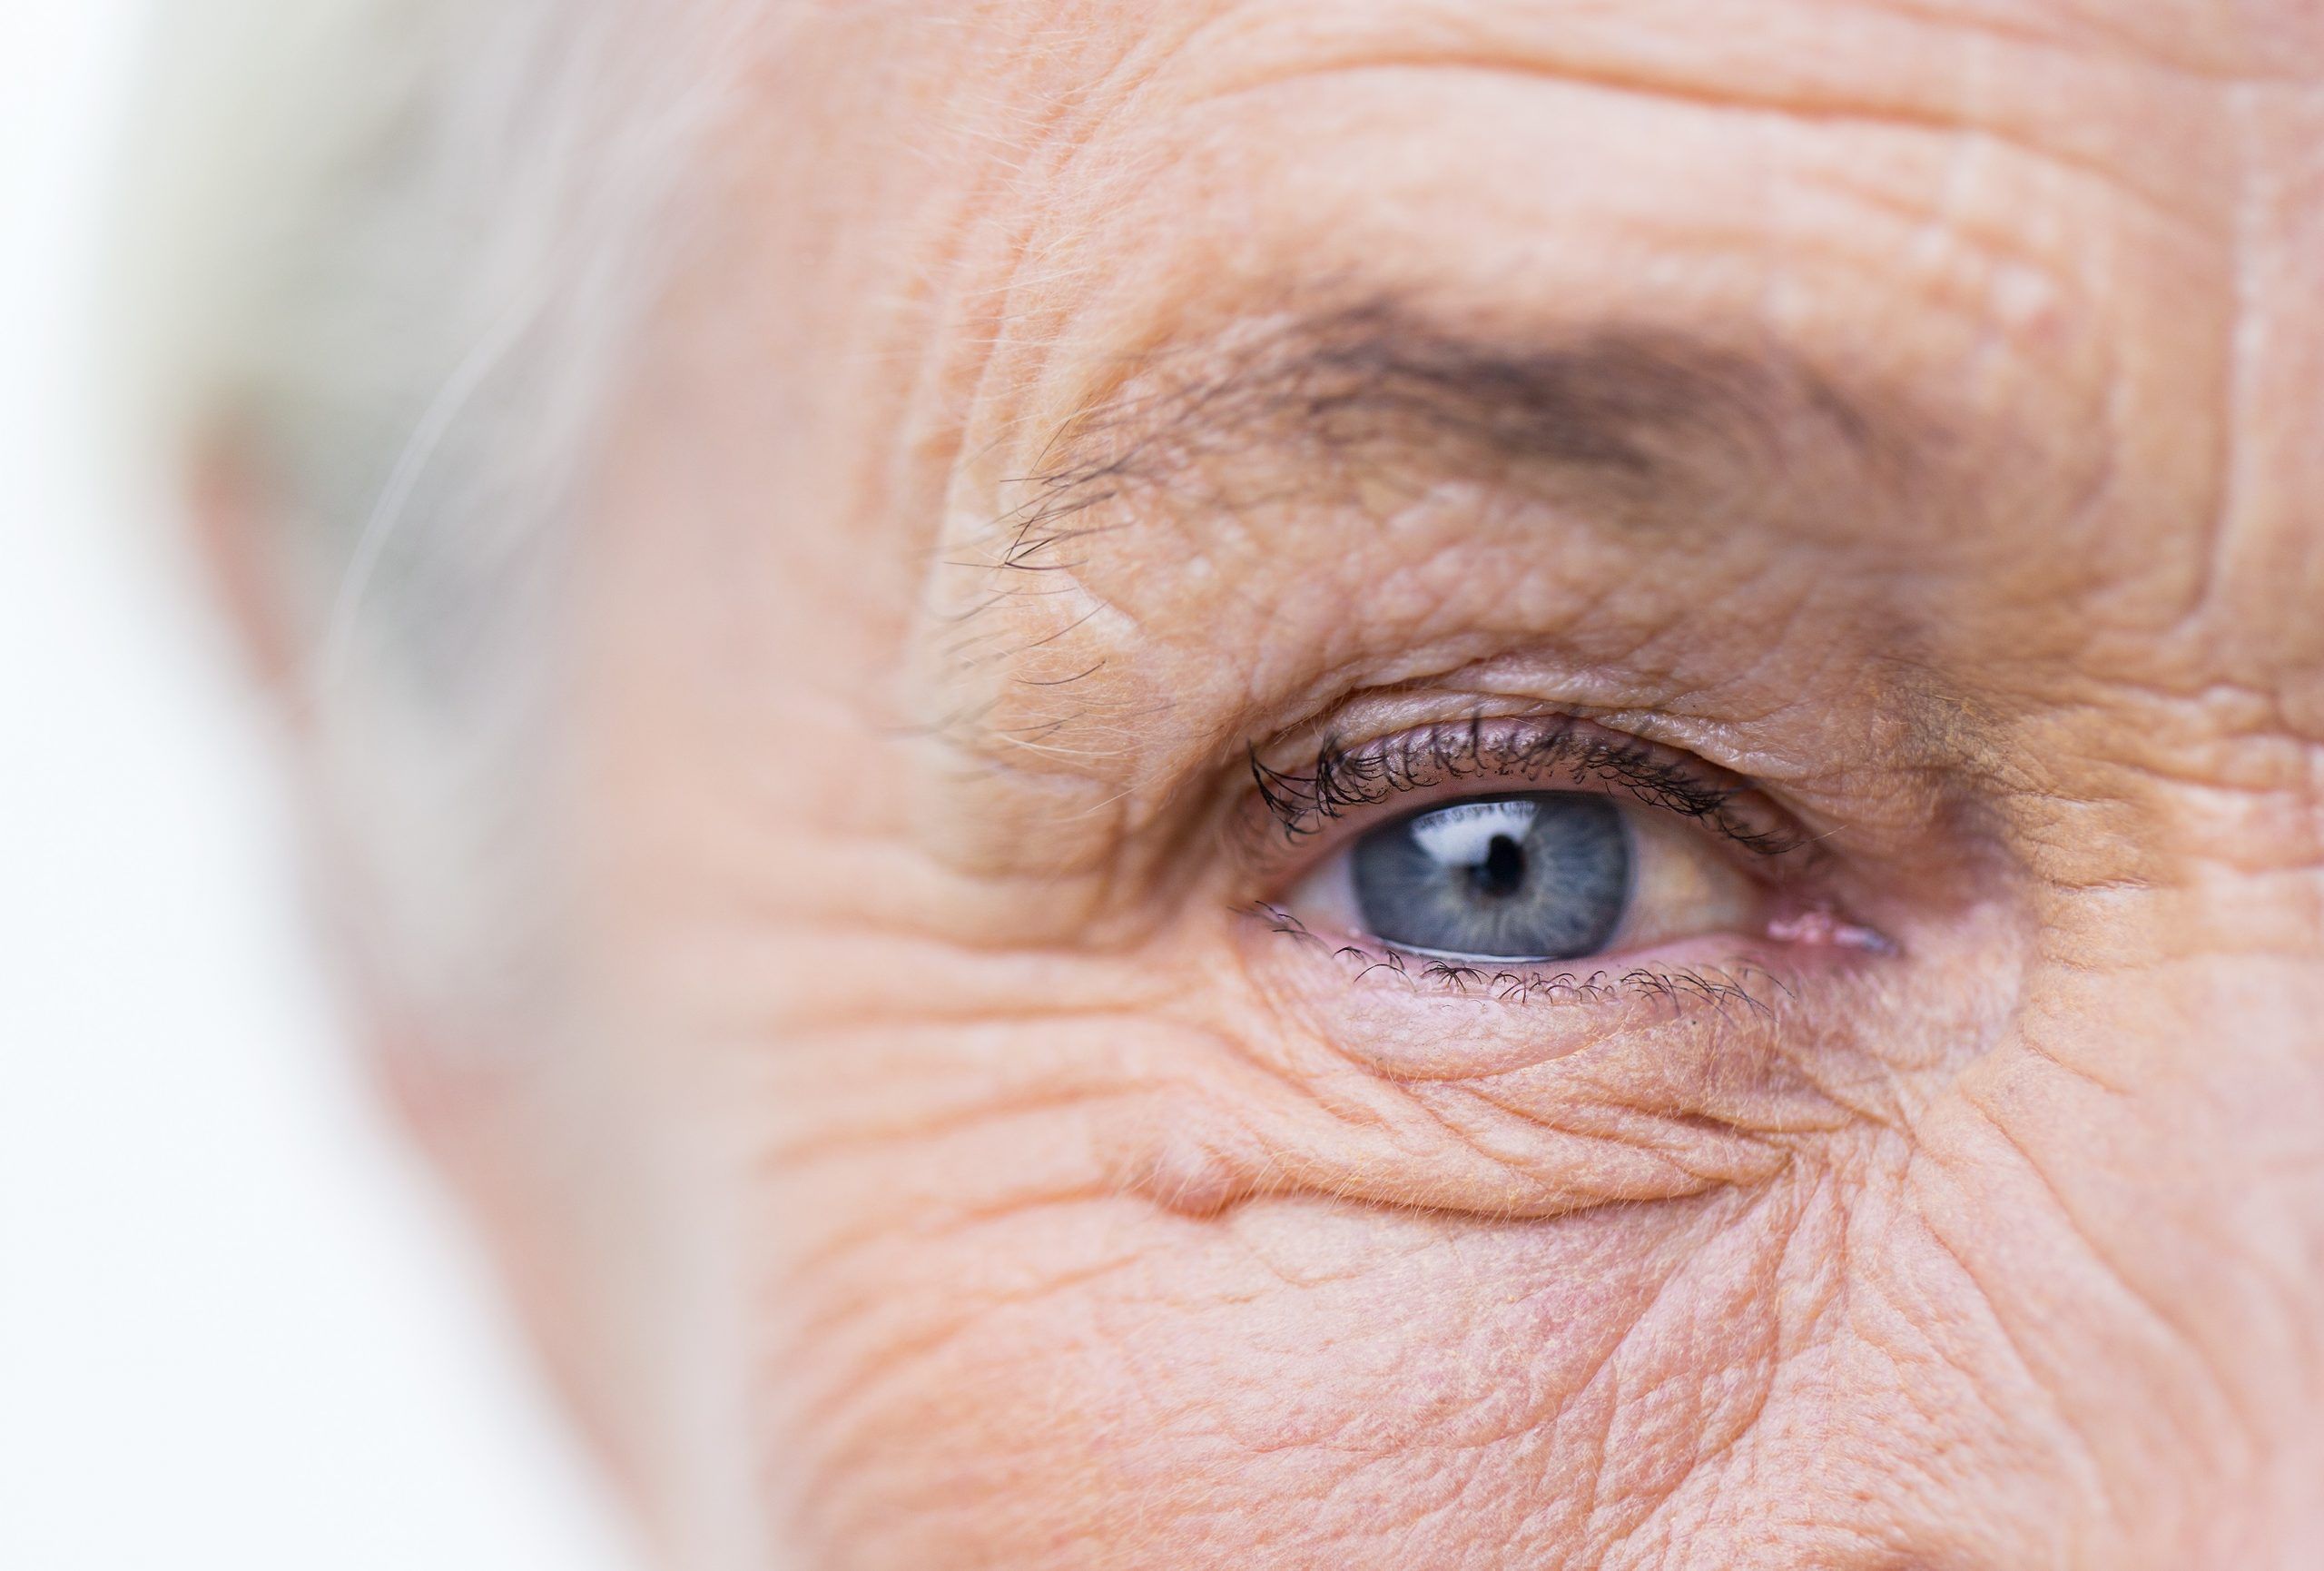 It was estimated that in 2019 more than 2.5 million Canadians were living with AMD, the leading cause of vision loss in people over the age of 50. ISTOCK. 